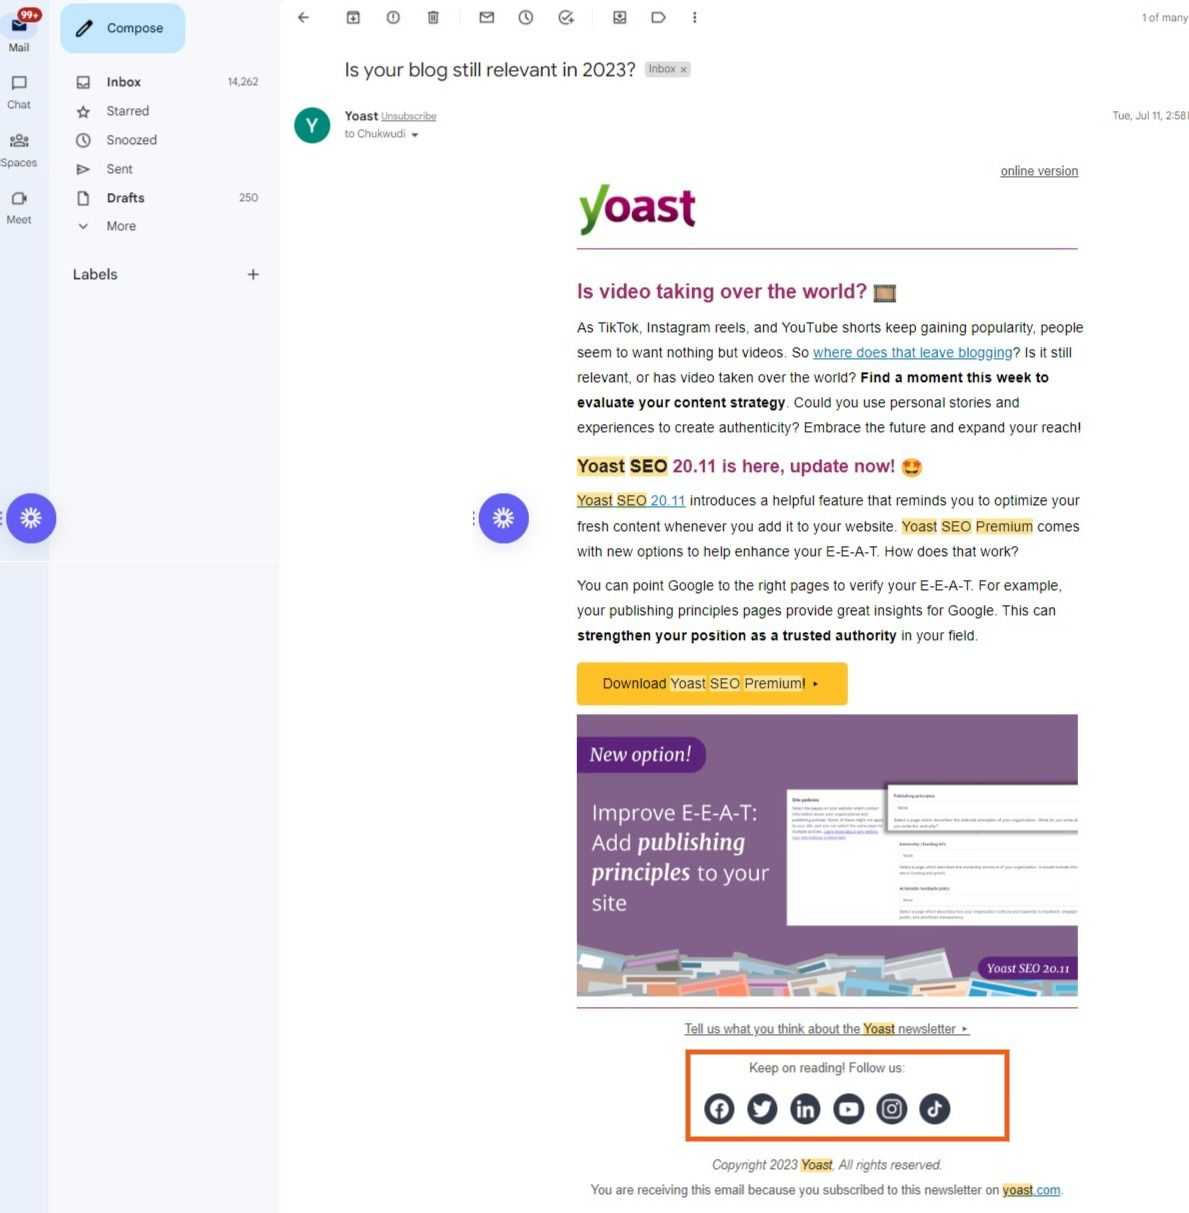 Linking to your social media pages - email sent by Yoast